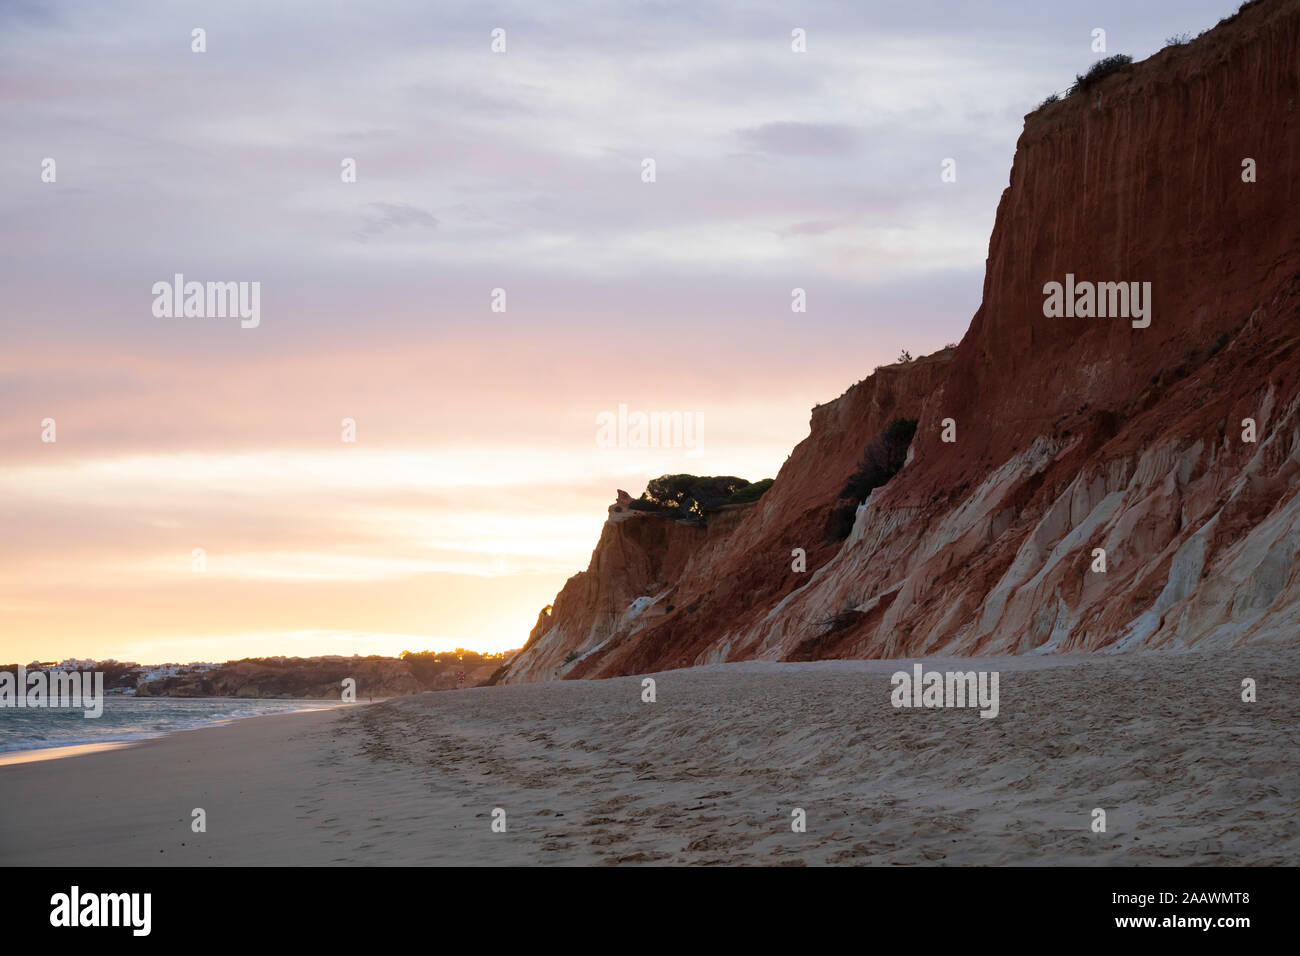 Rocky sandstone at Atlantic Coast against cloudy sky during sunset, Algarve, Portugal Stock Photo